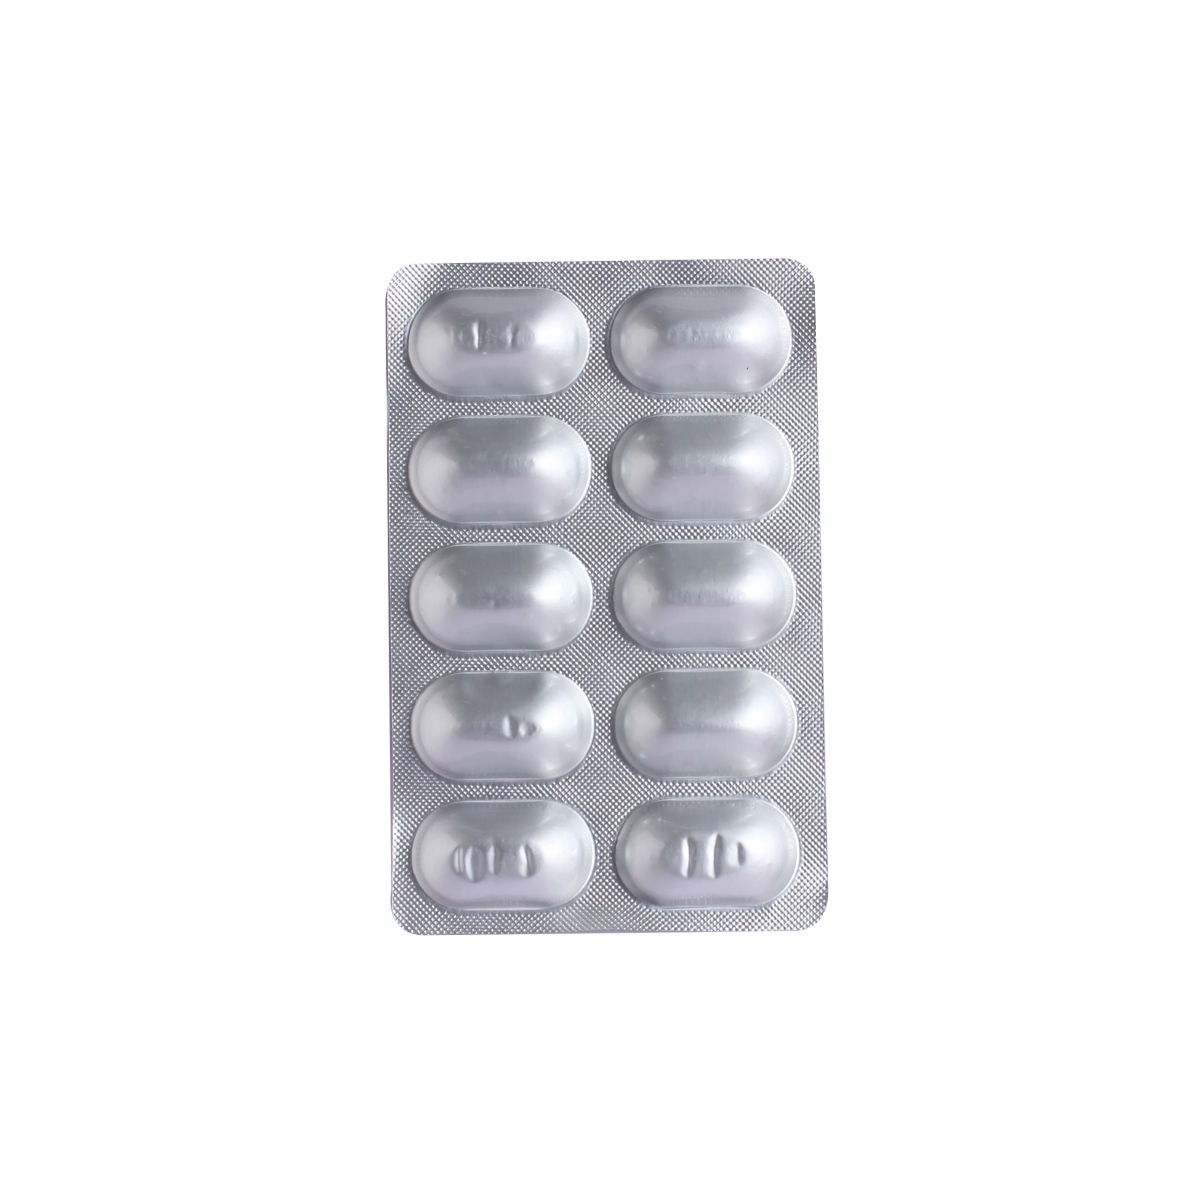 Zixflam Tablet 10's, Pack of 10 TABLETS